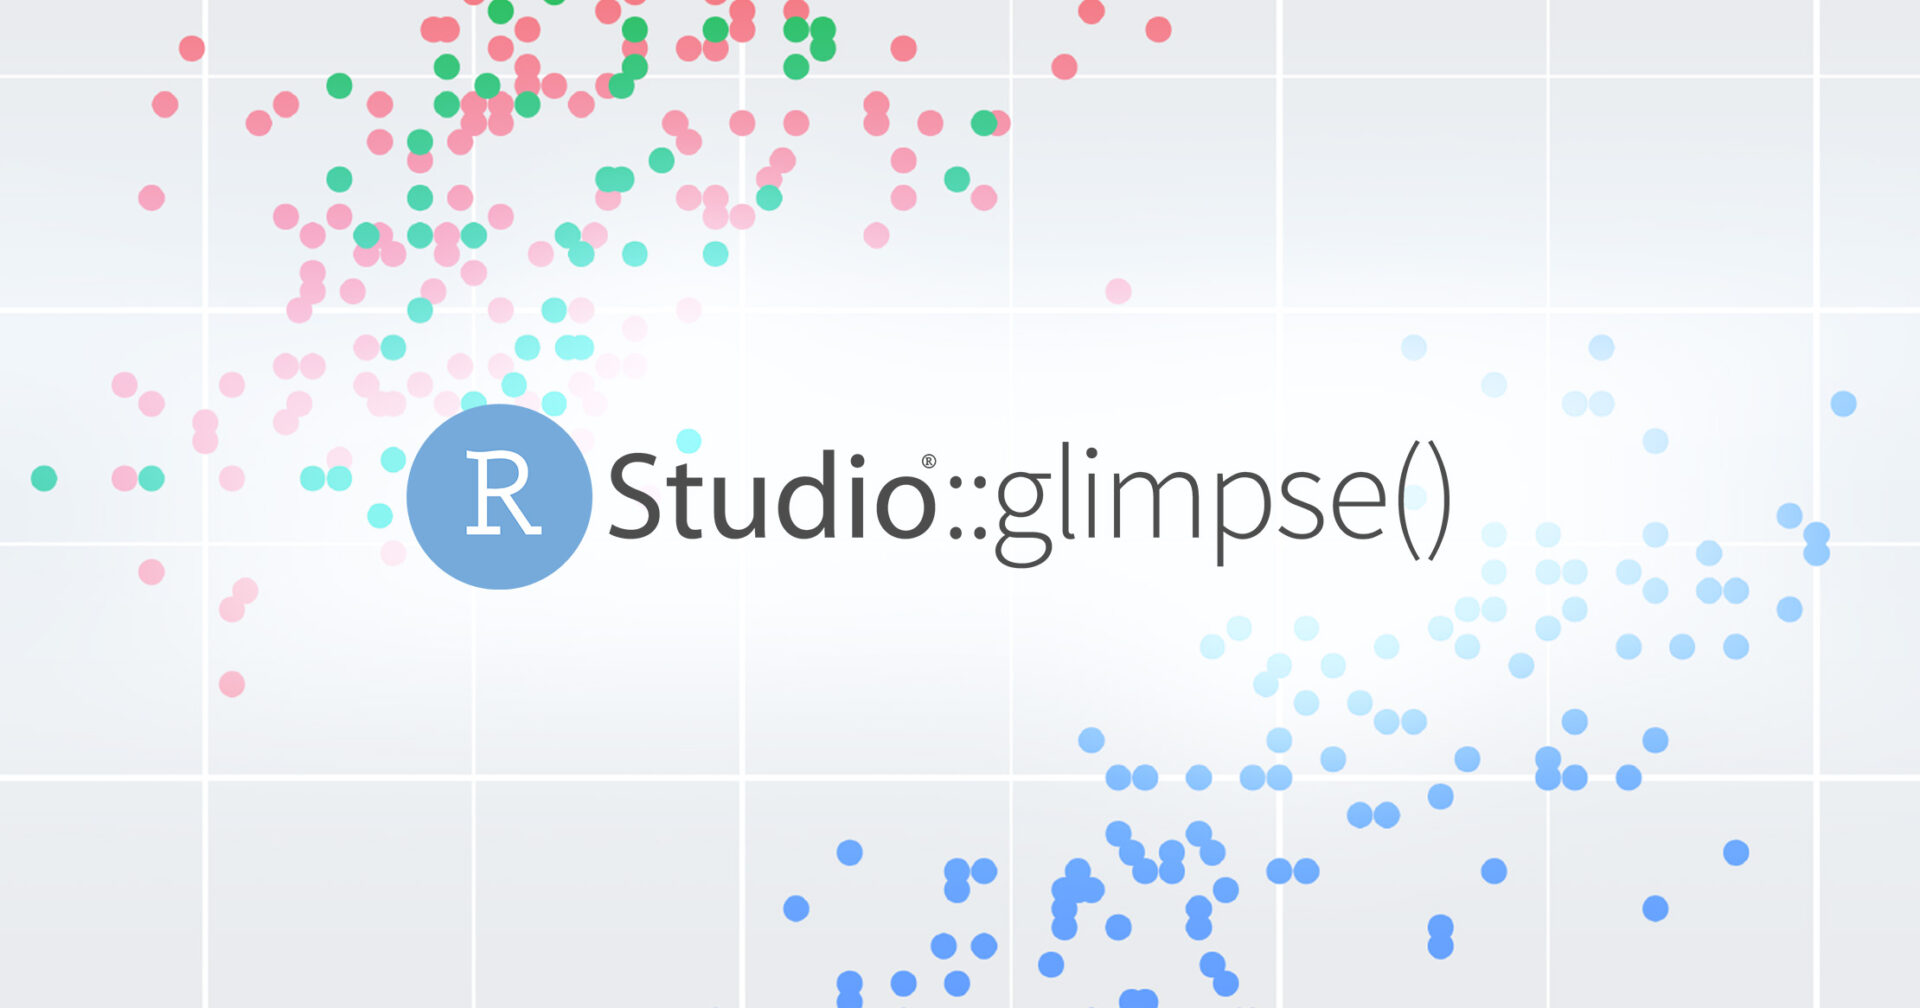 Plot output of a ggplot2 scatterplot with the RStudio glimpse logo on top.